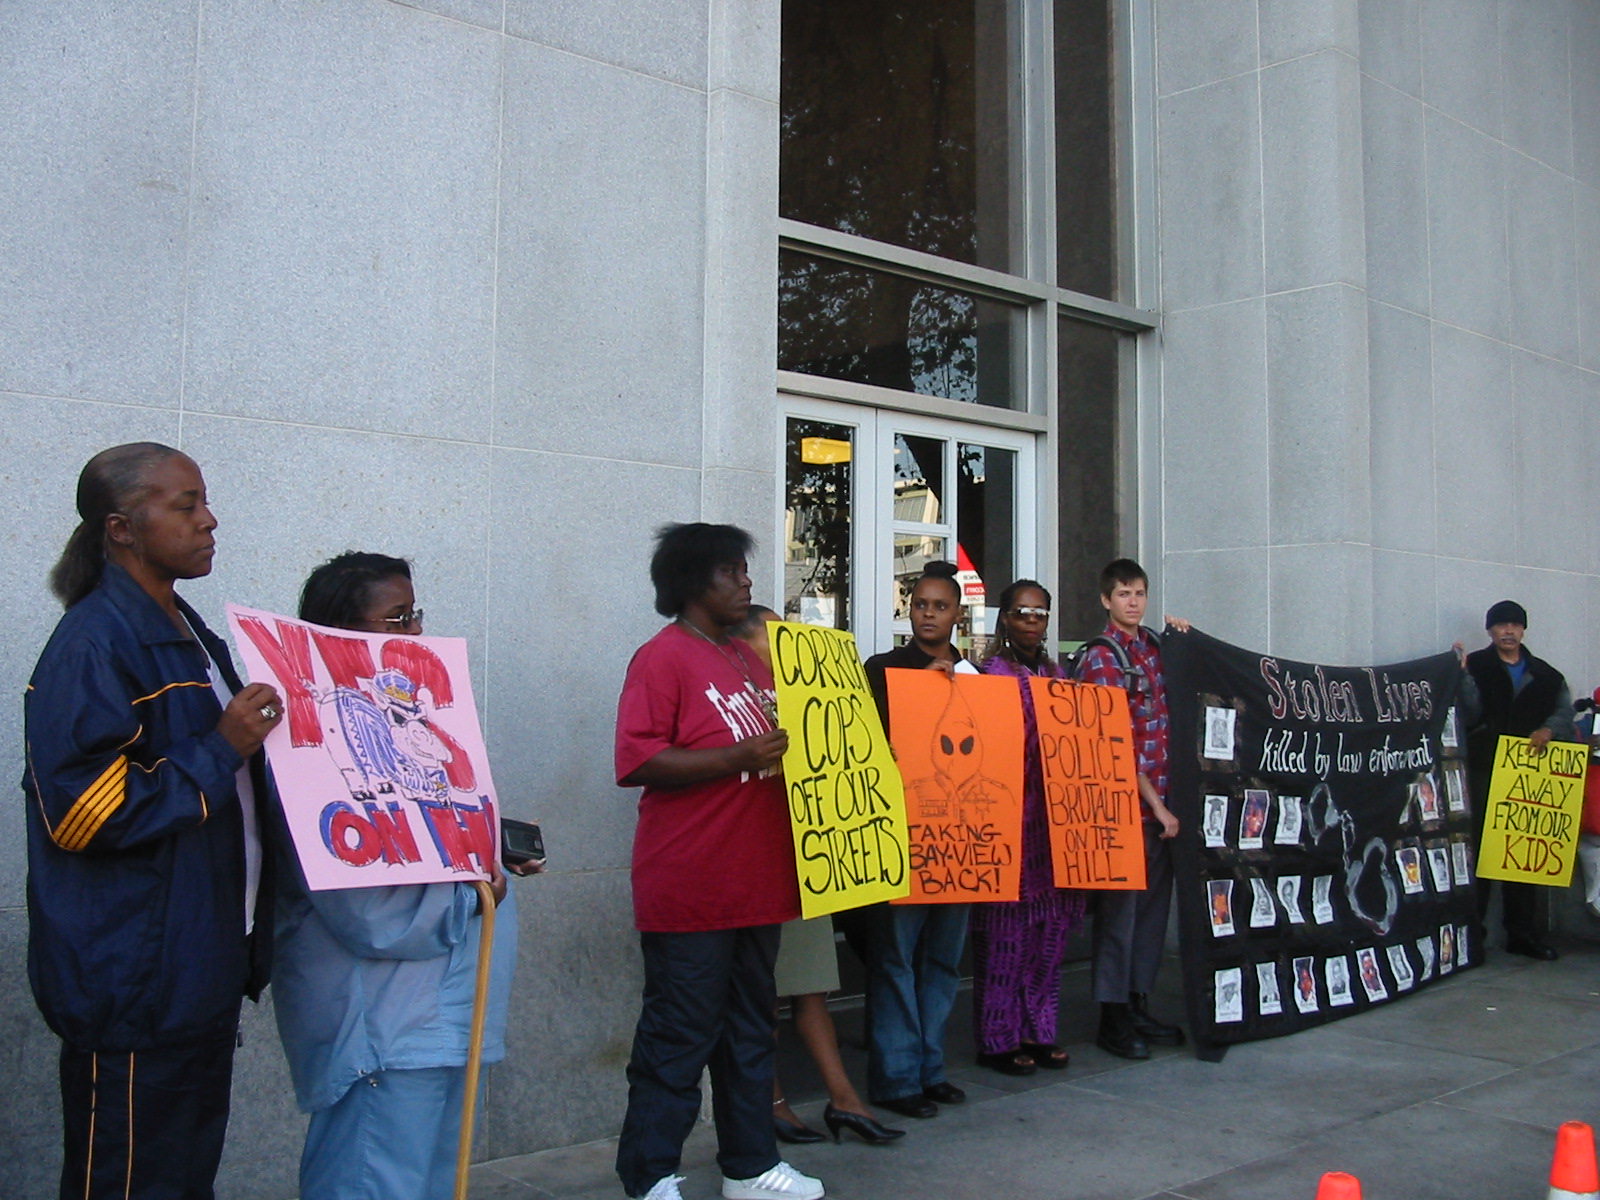 protest_hall_of_justice_008.jpg 